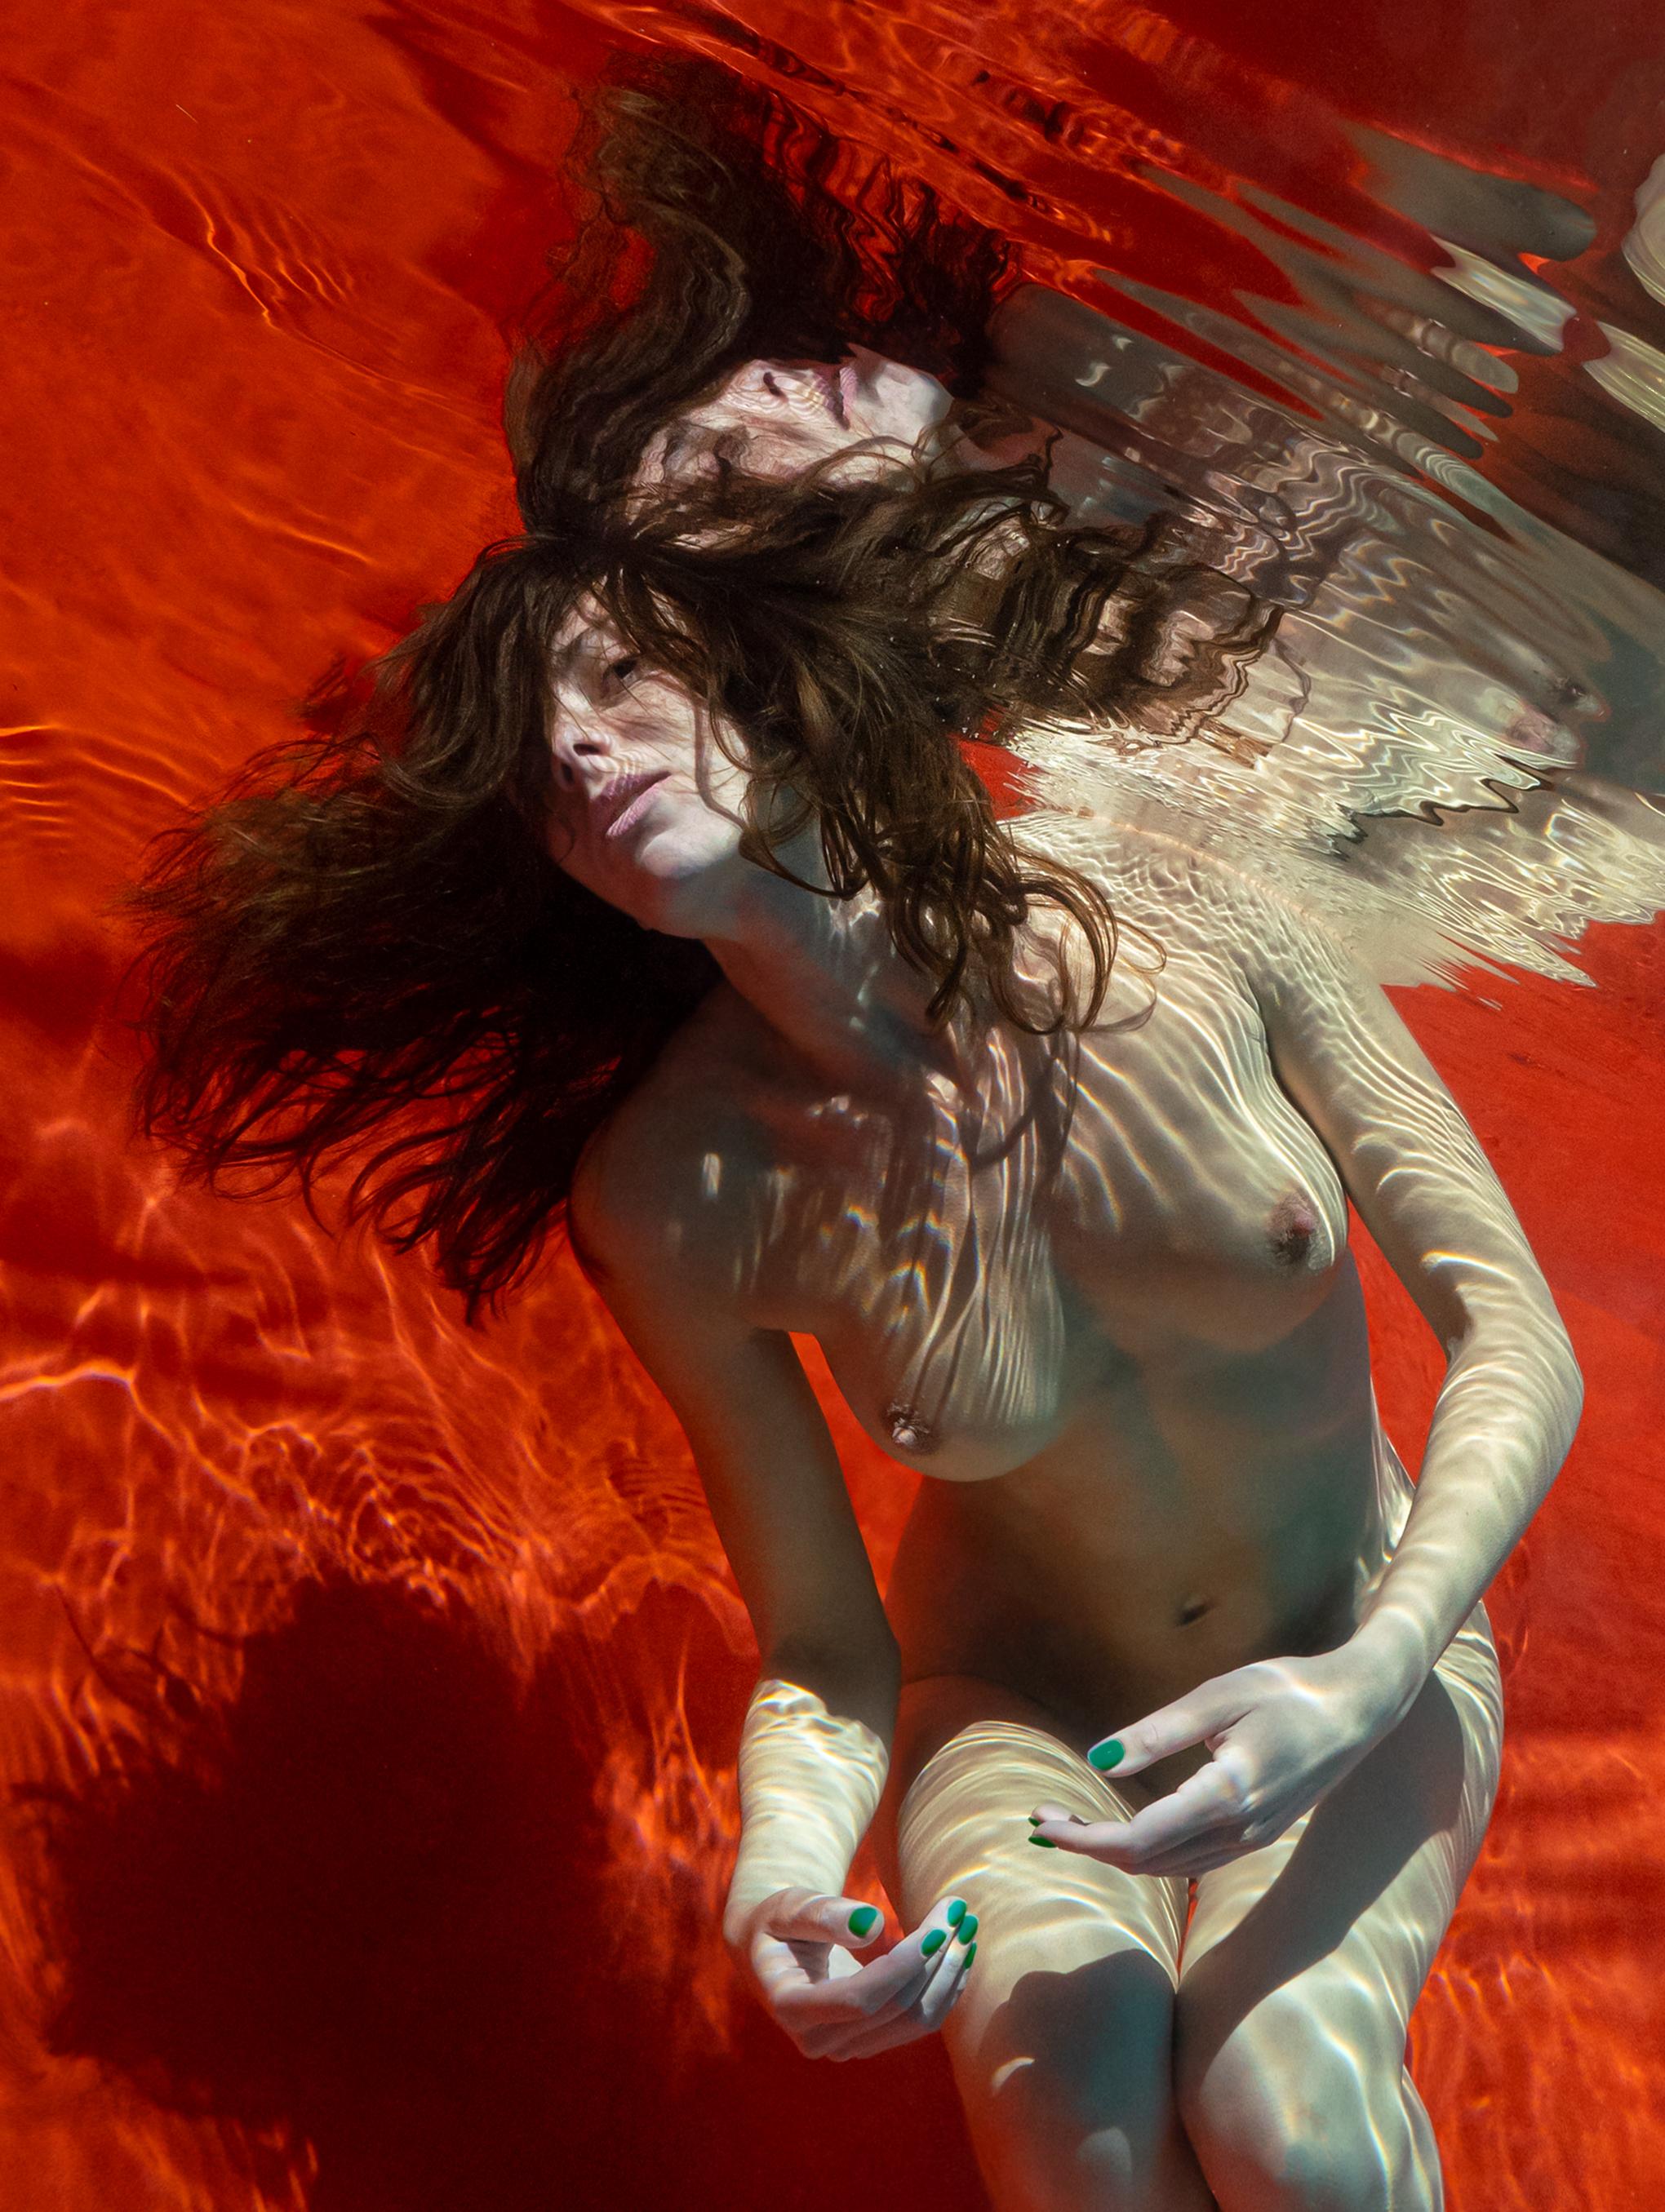 Alex Sher Figurative Photograph - Green Nails - underwater nude photograph - archival pigment print